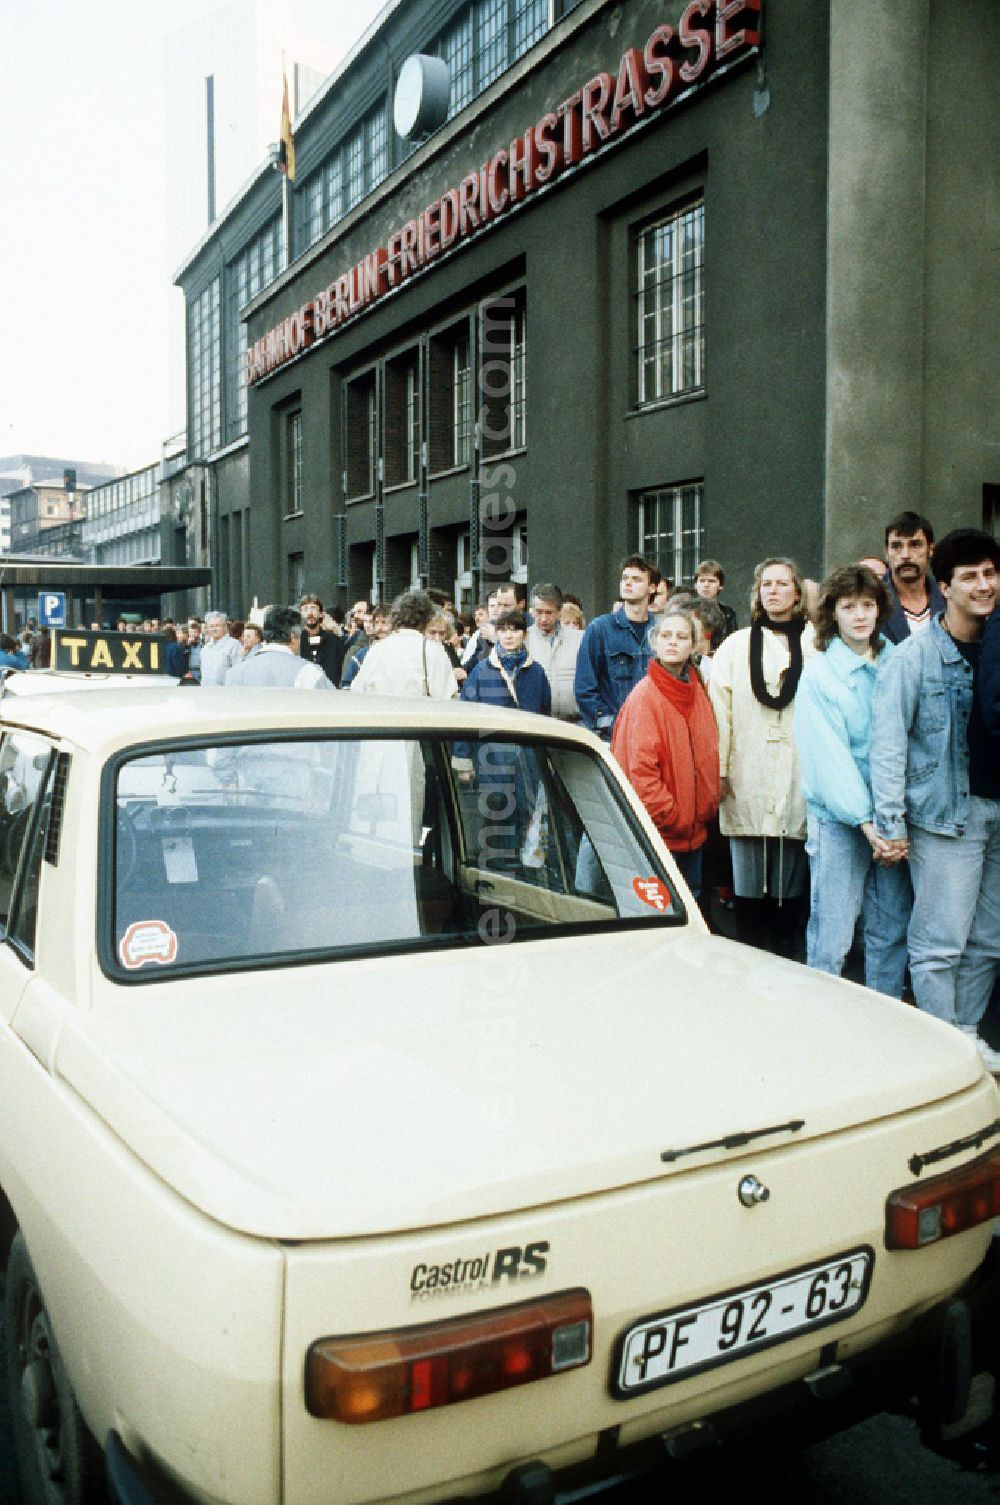 GDR picture archive: Berlin - Queues of people and crowds of GDR citizens at the palace of tears of the GueSt passport control point and border crossing point at the Friedrichstrasse S-Bahn station in Berlin East Berlin on the territory of the former GDR, German Democratic Republic